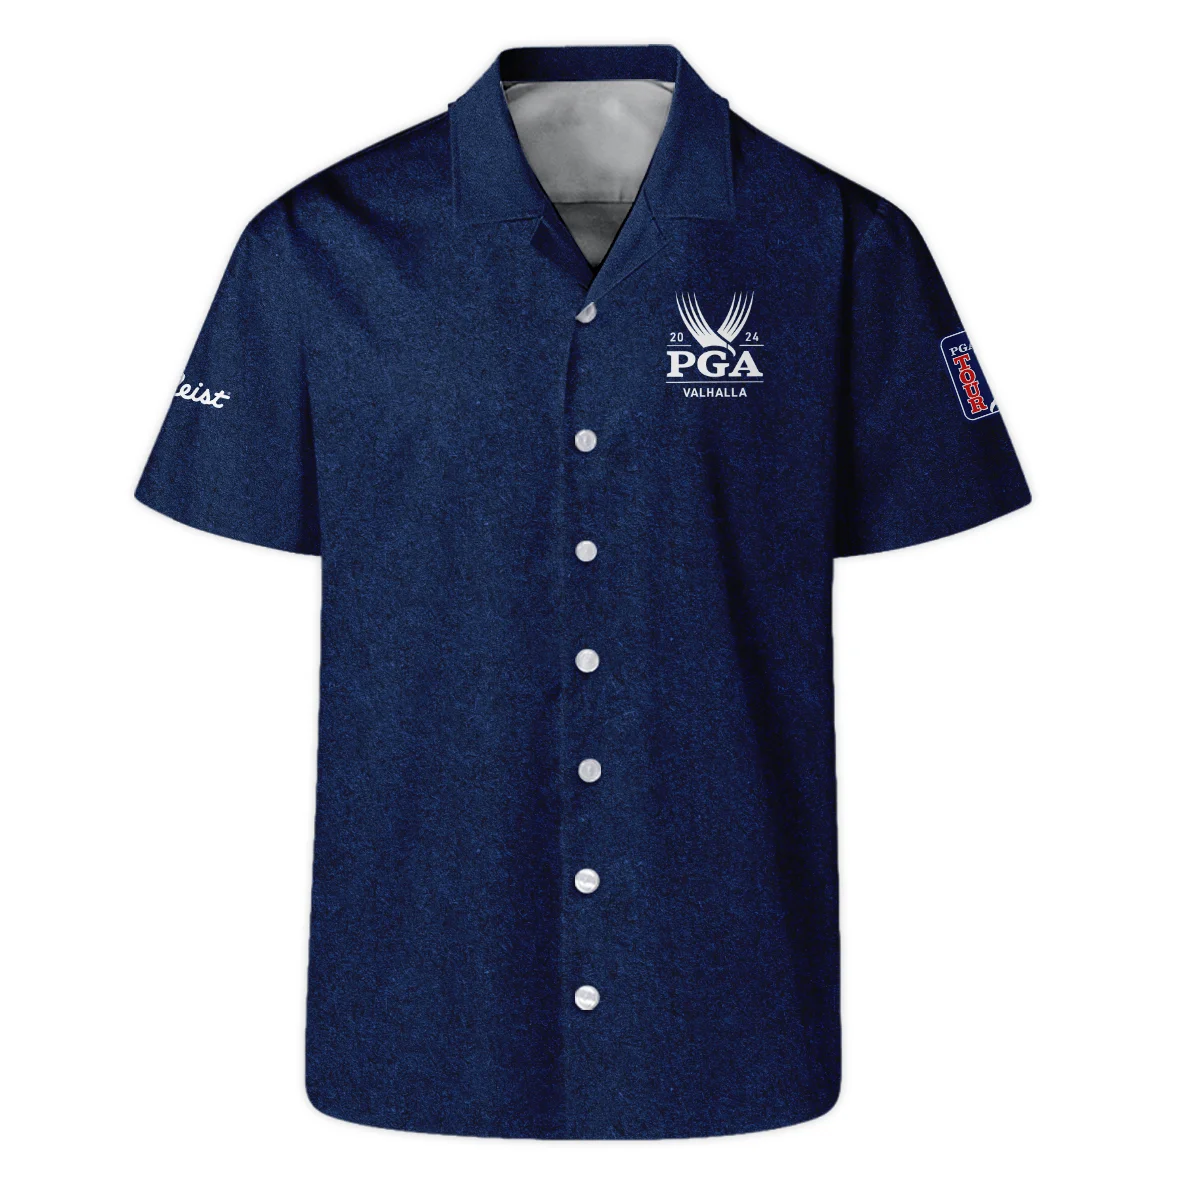 Special Version 2024 PGA Championship Valhalla Titleist Polo Shirt Blue Paperboard Texture Polo Shirt For Men